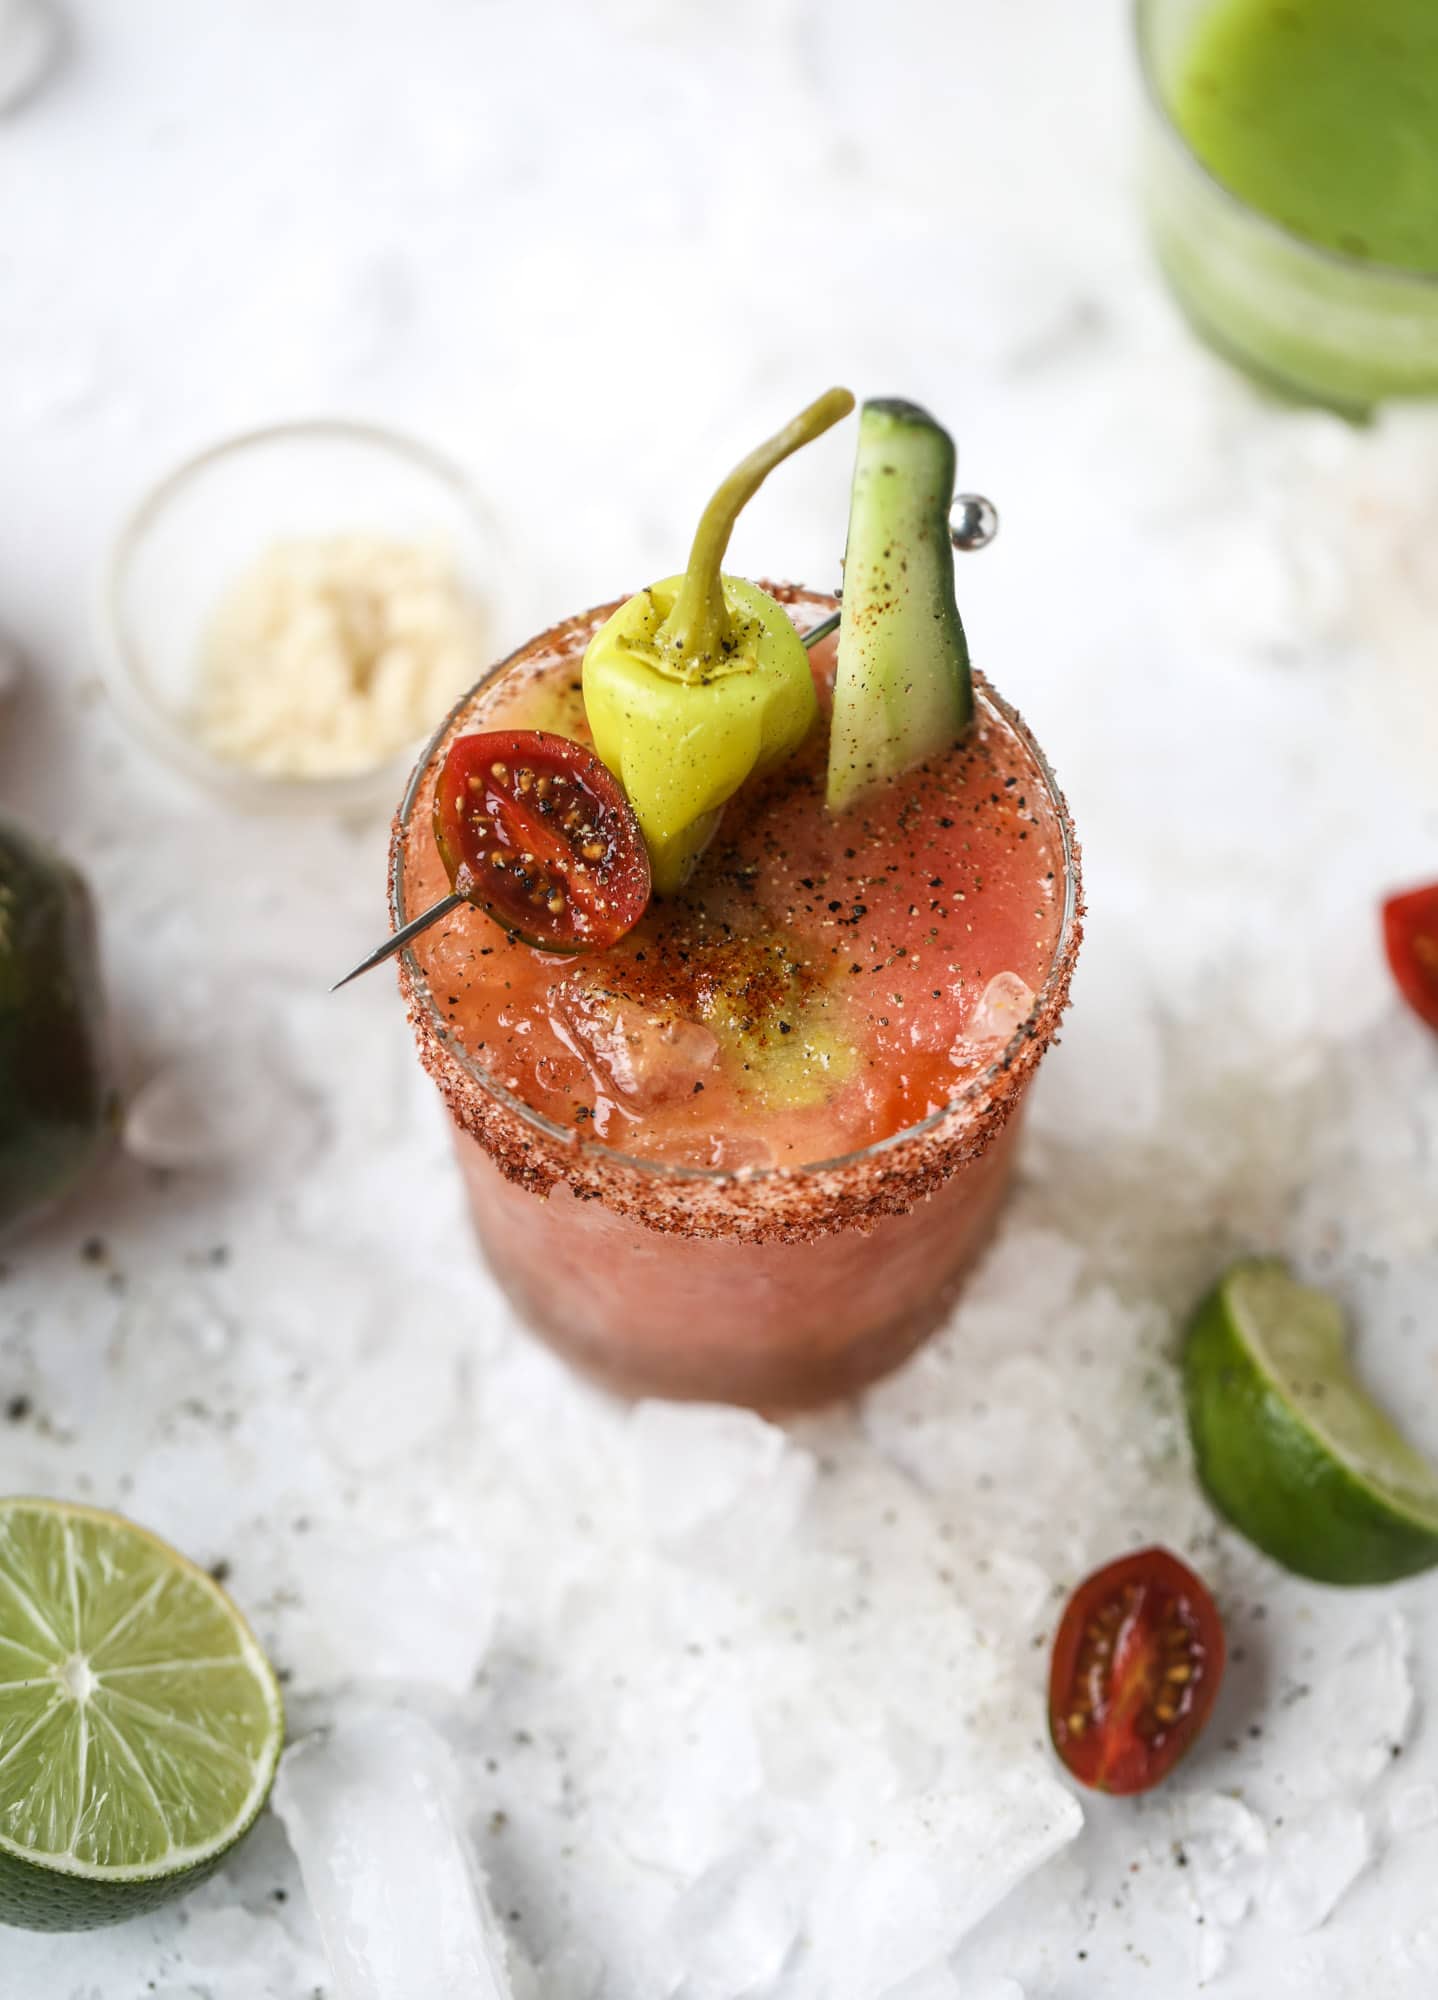 This bloody mary recipe is made with fresh heirloom tomatoes - the gems of summer! The colors swirl together to create a stunning drinking that is loaded with smoky, spicy flavor. Top with your favorite snacks foe the perfect brunch! I howsweeteats.com #bloody #mary #recipe #best #heirloom #tomatoes #cocktail